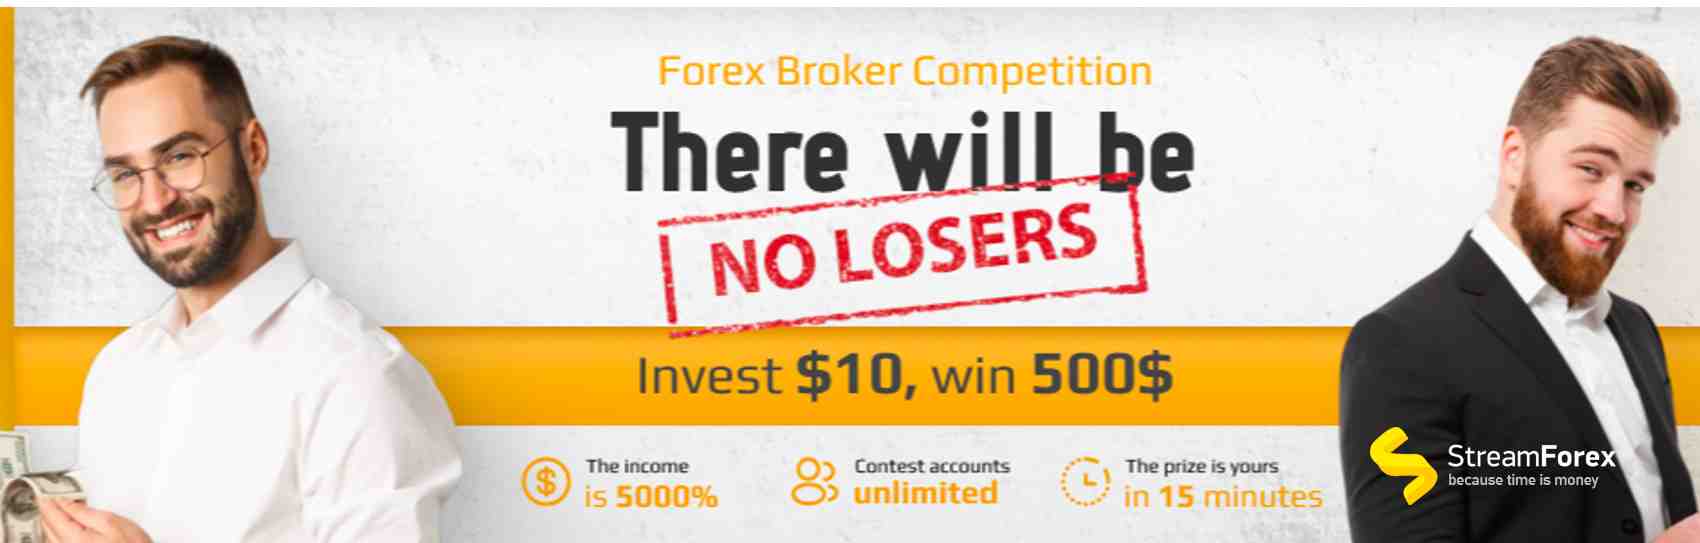 Trader’s Competition, Win 500$ – StreamForex